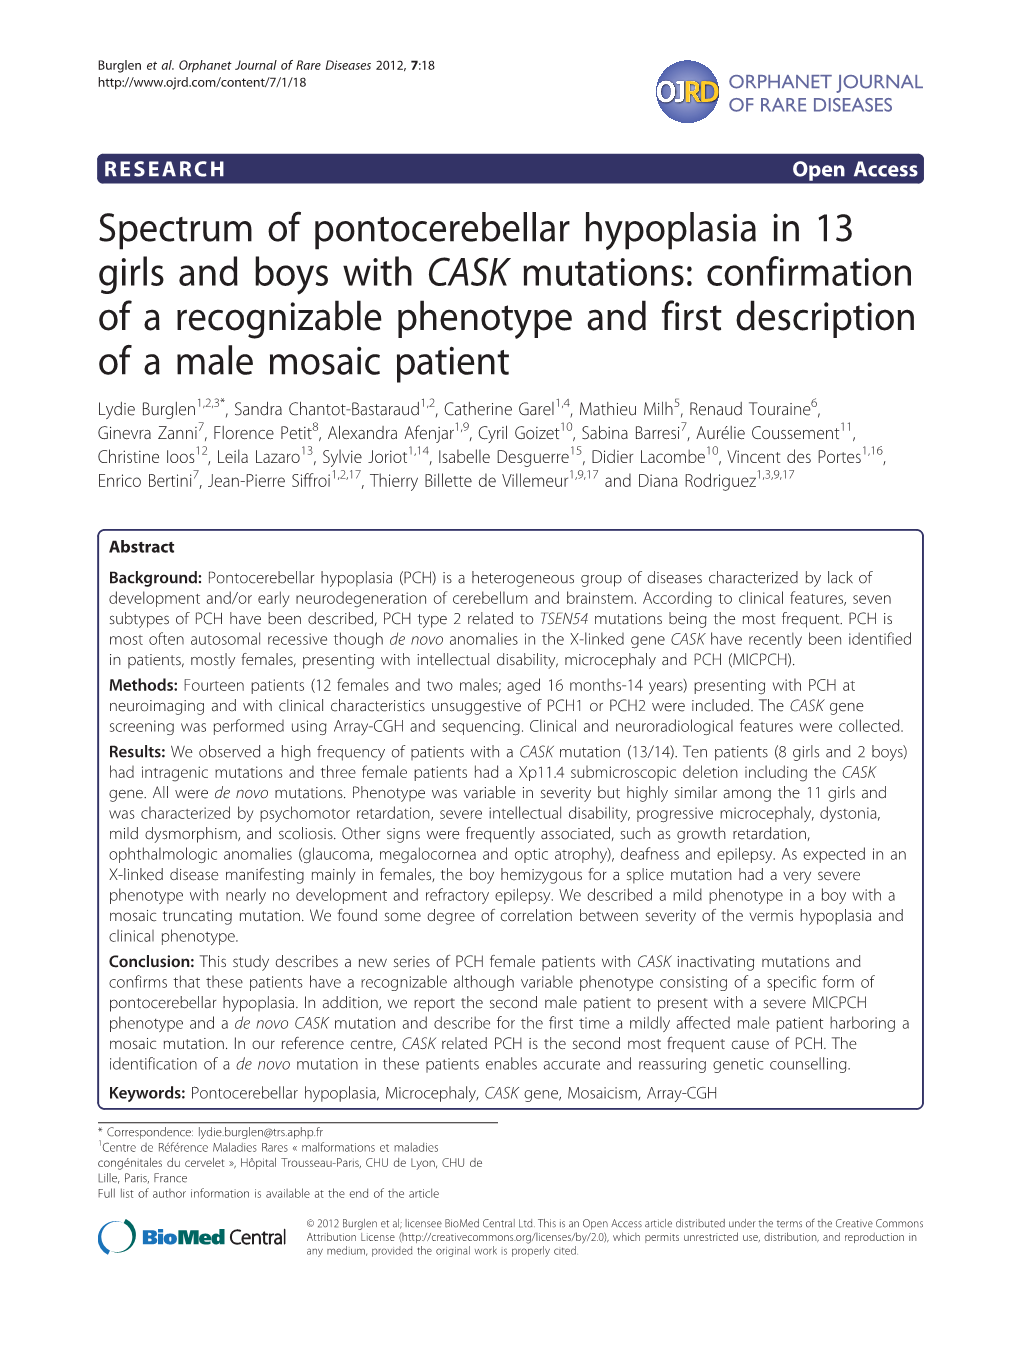 Spectrum of Pontocerebellar Hypoplasia in 13 Girls and Boys With